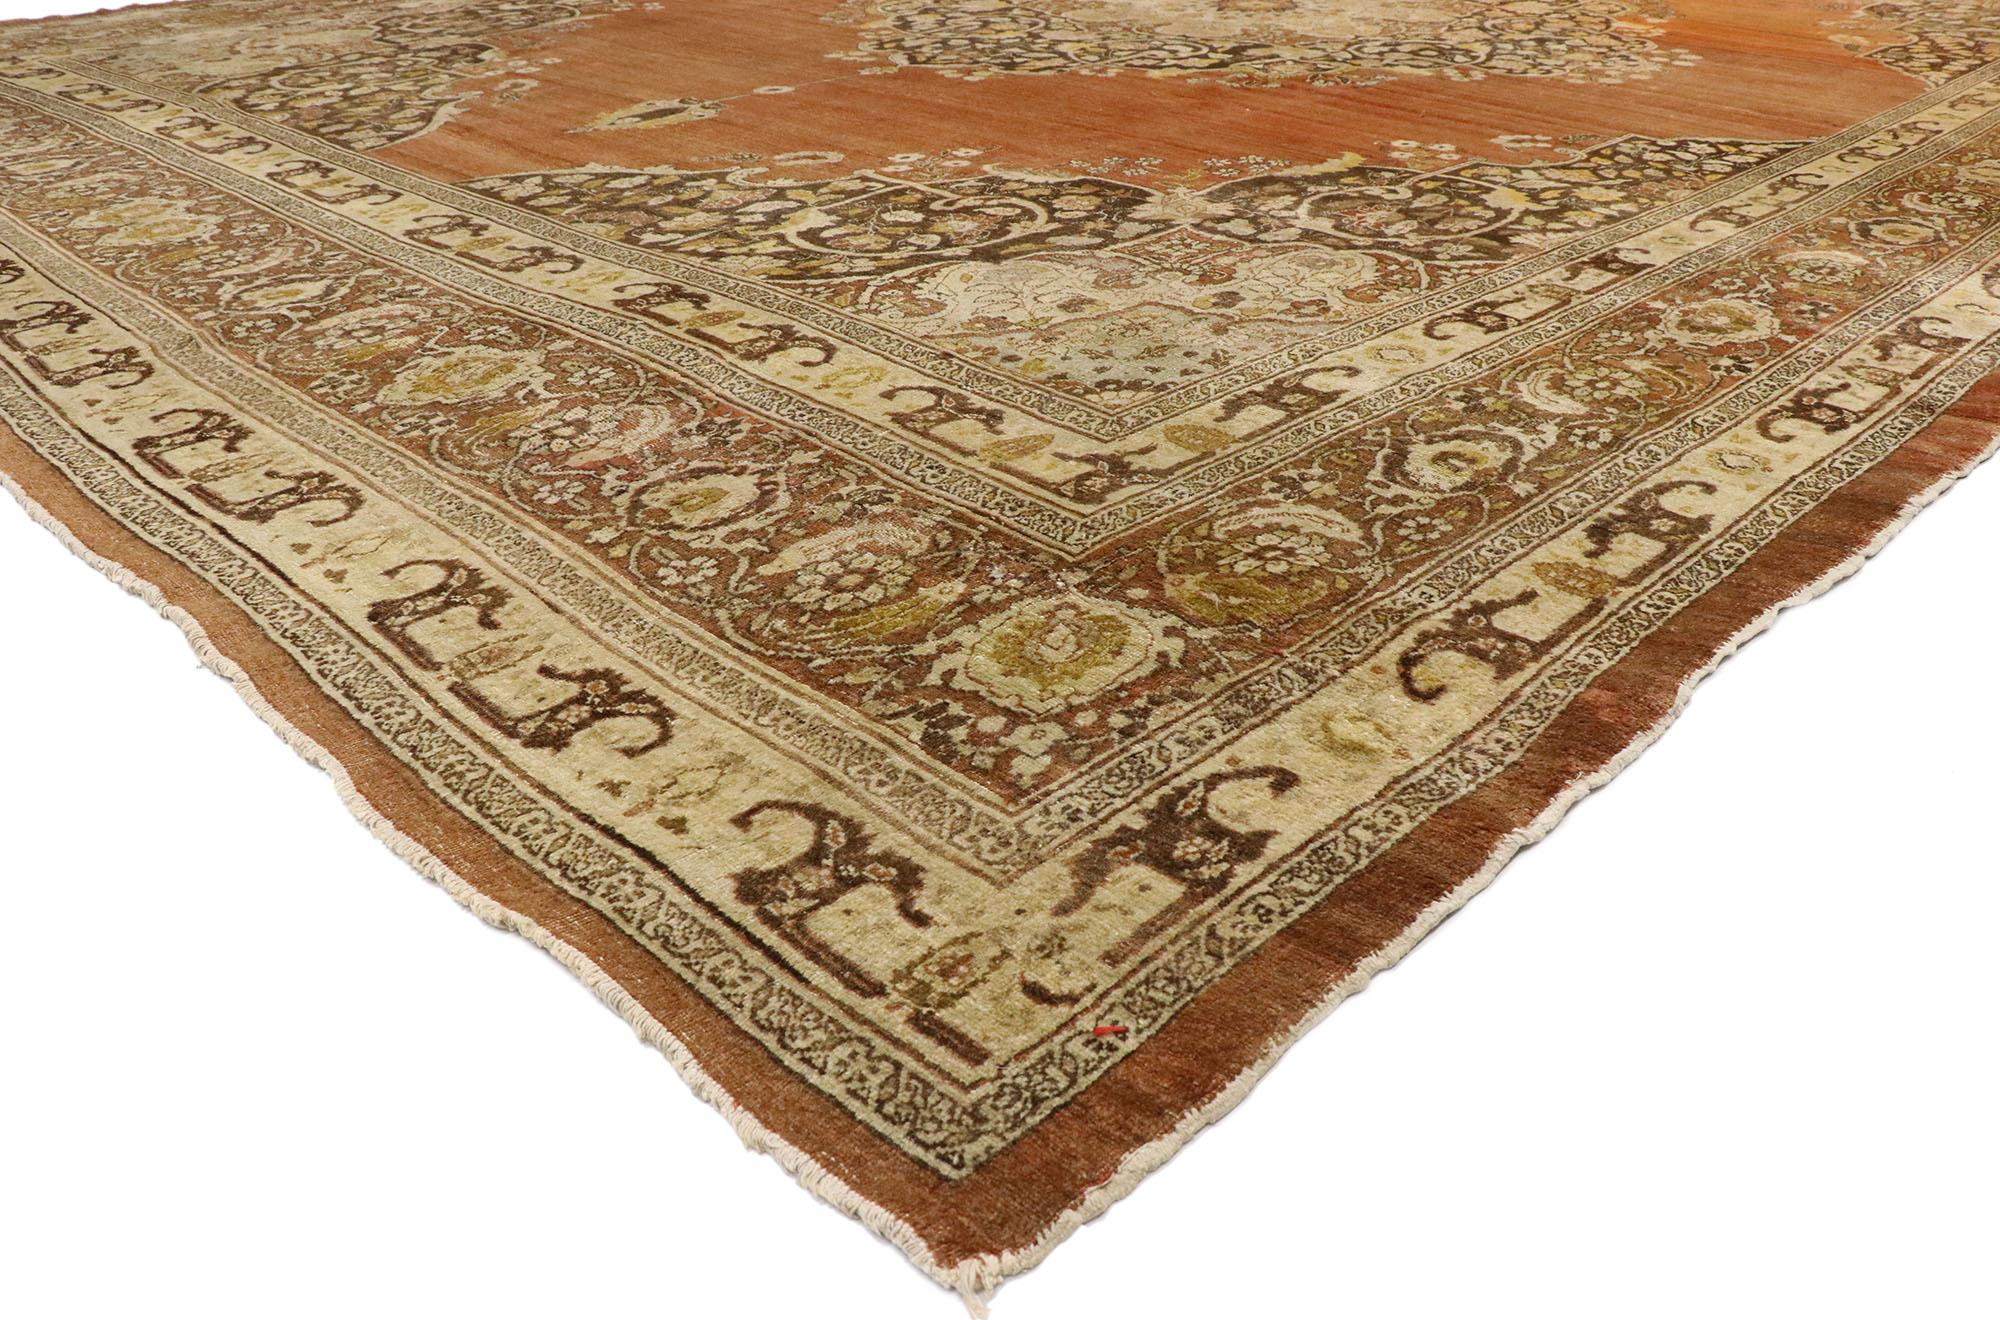 74321 Haji Khalili Antique Persian Tabriz Rug, 13'01 x 17'03. Haji Khalili Persian Tabriz rugs are renowned for their exceptional craftsmanship and intricate designs, originating from Tabriz in northwestern Iran. These rugs are known for their